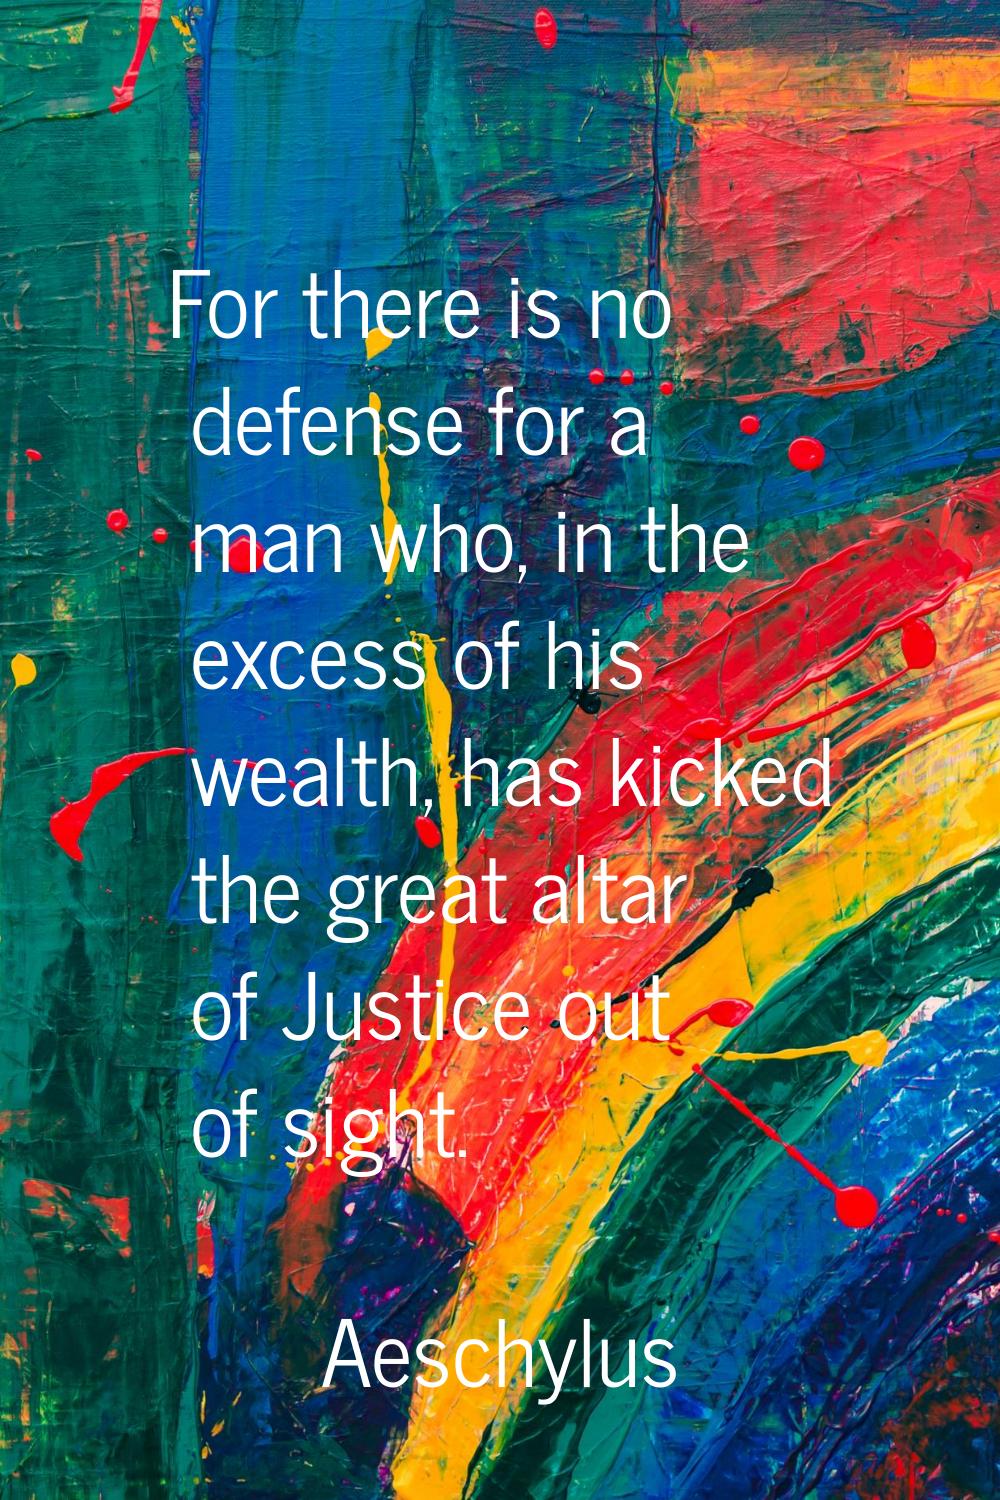 For there is no defense for a man who, in the excess of his wealth, has kicked the great altar of J